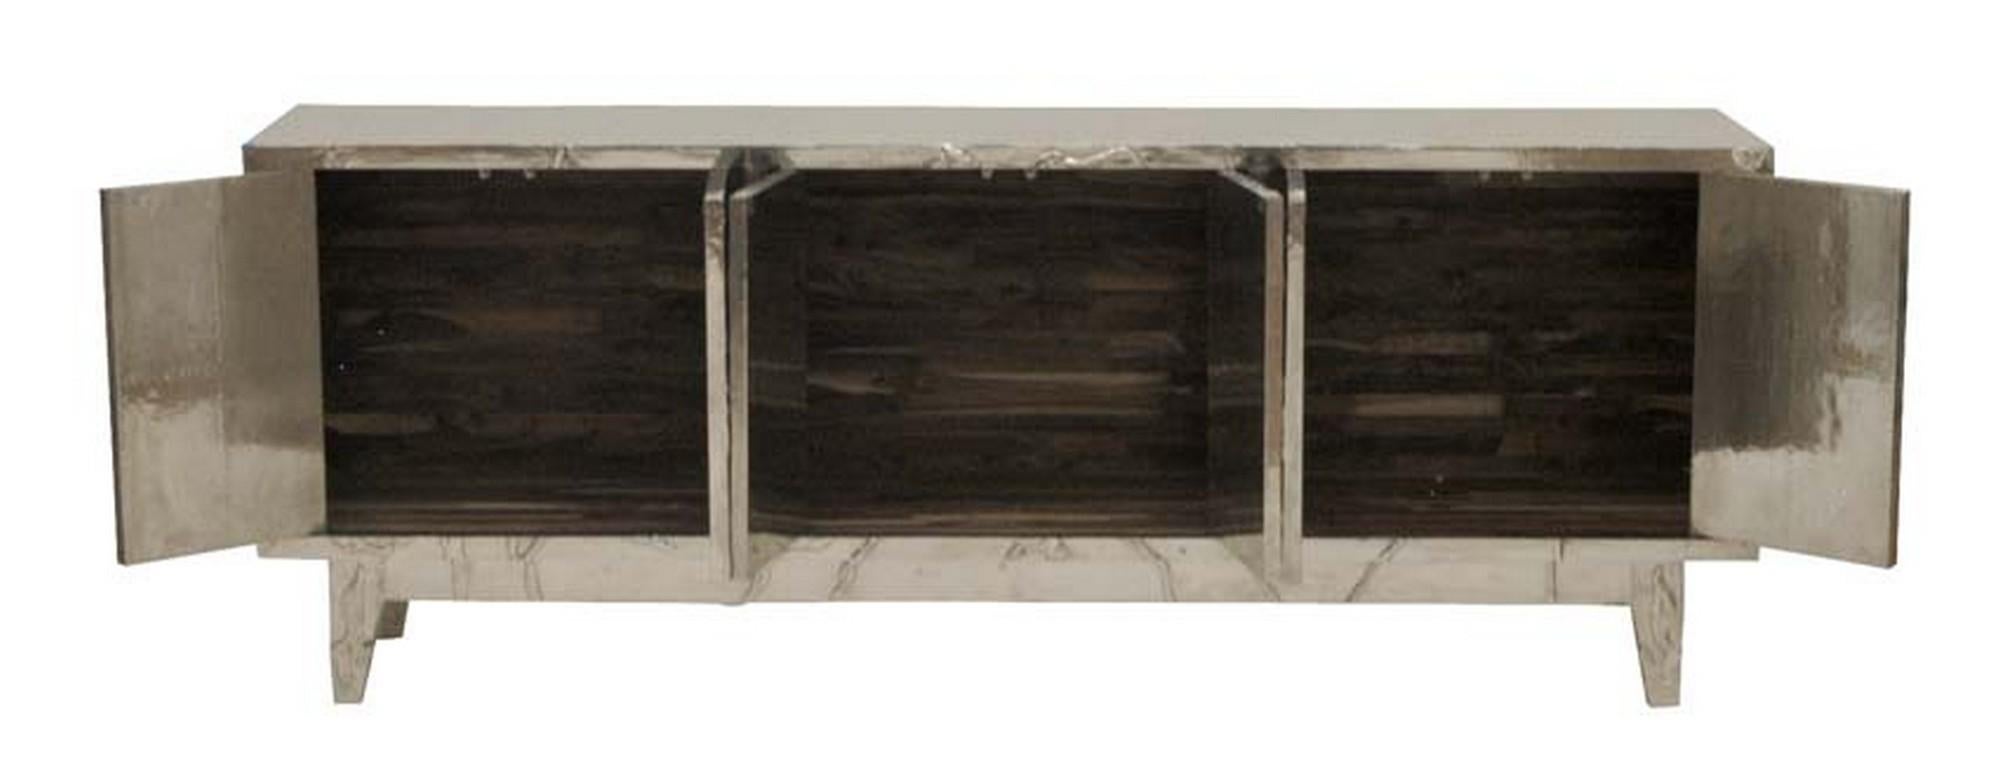 Floral Credenza in White Bronze Clad Over Teakwood Handcrafted In India For Sale 6